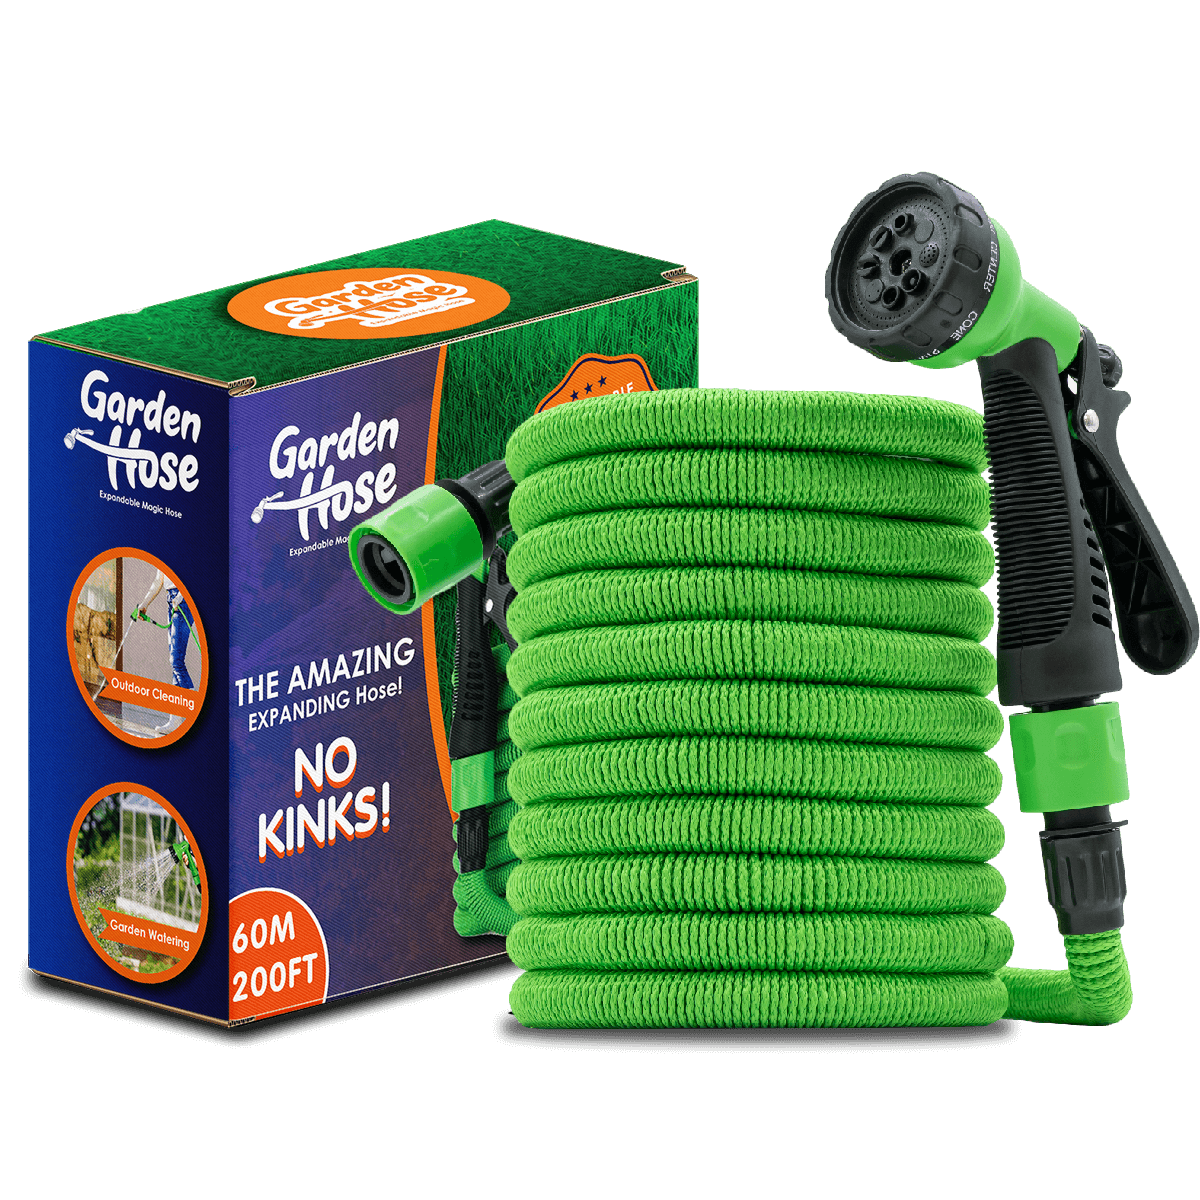 Expandable Garden Hose Pipe -Leak Proof Flexible Magic Hose - Easy To Store - *BEST SELLER*, 200ft / 60Meters